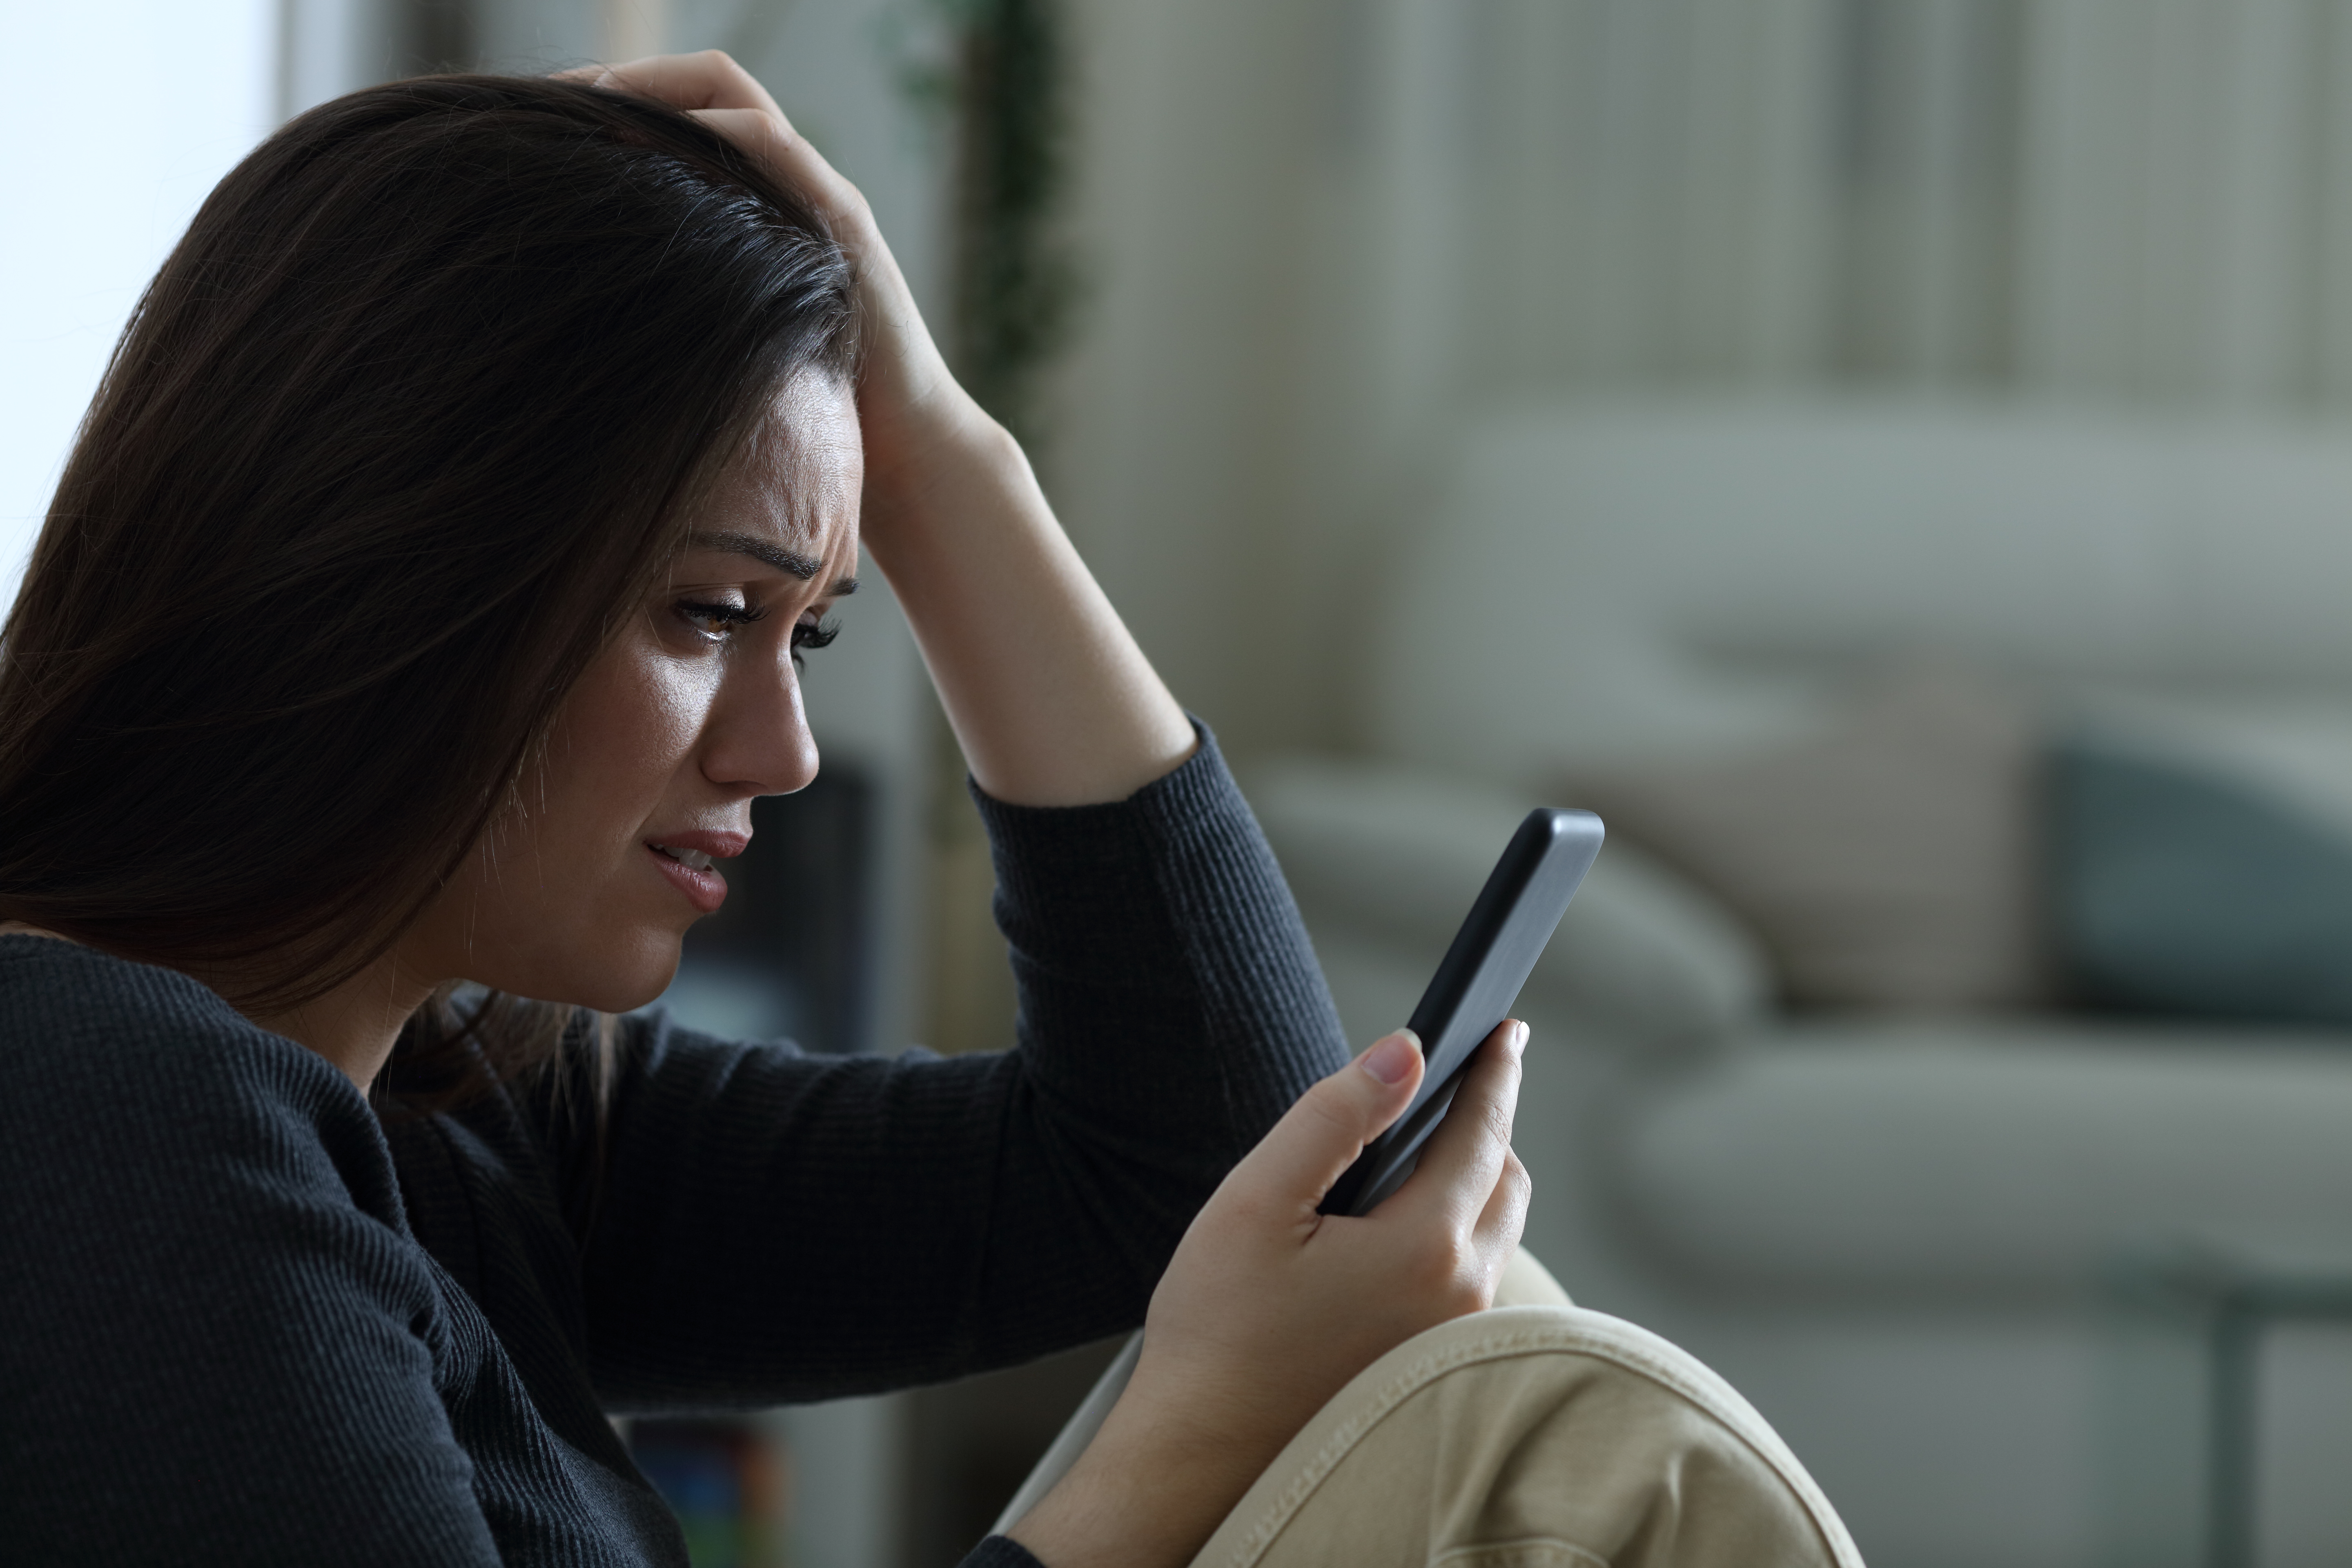 A woman looking sad while on her phone | Source: Shutterstock